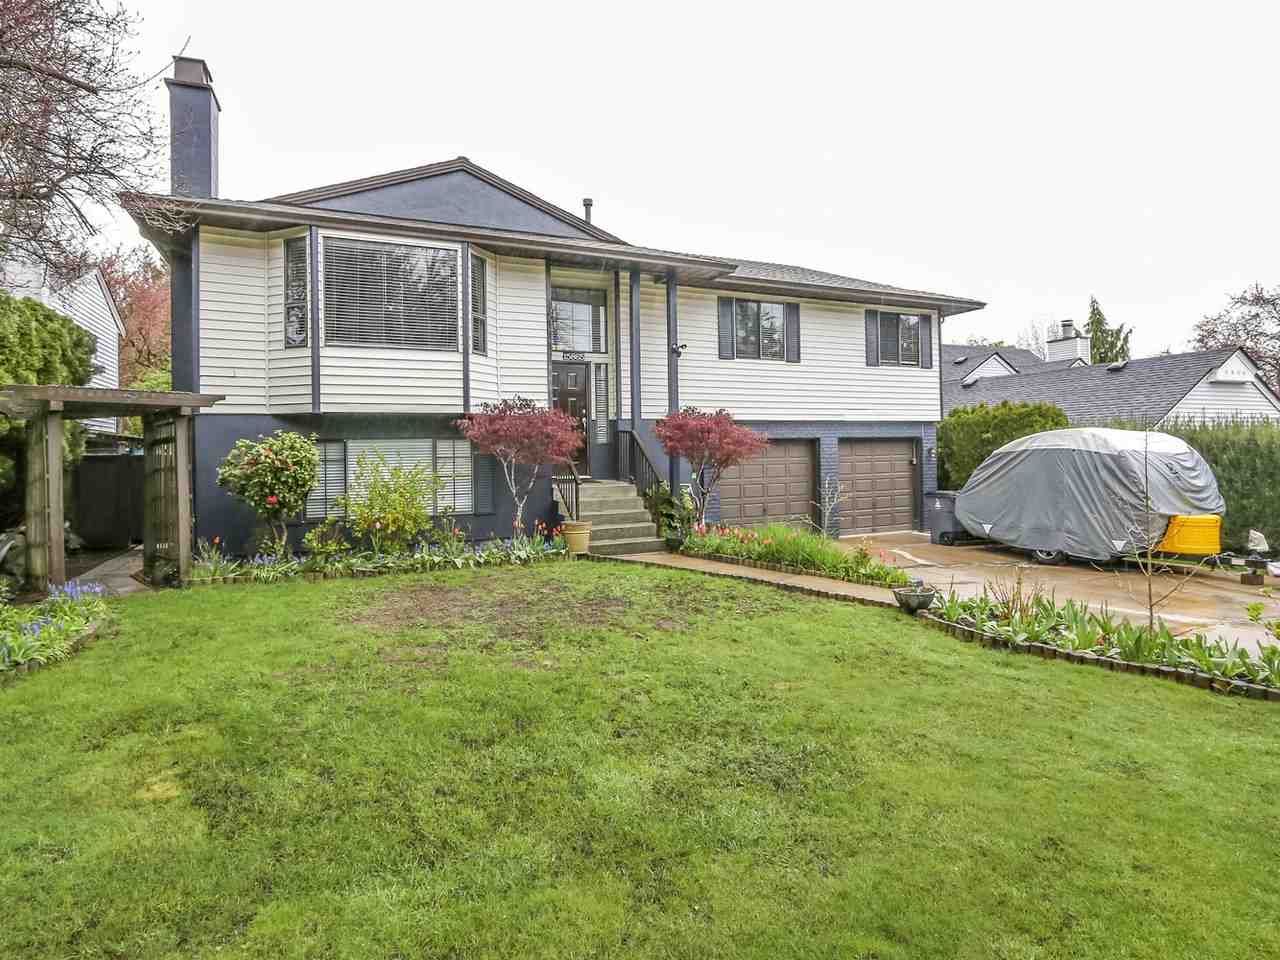 Main Photo: 15865 101 Avenue in Surrey: Guildford House for sale (North Surrey)  : MLS®# R2359276